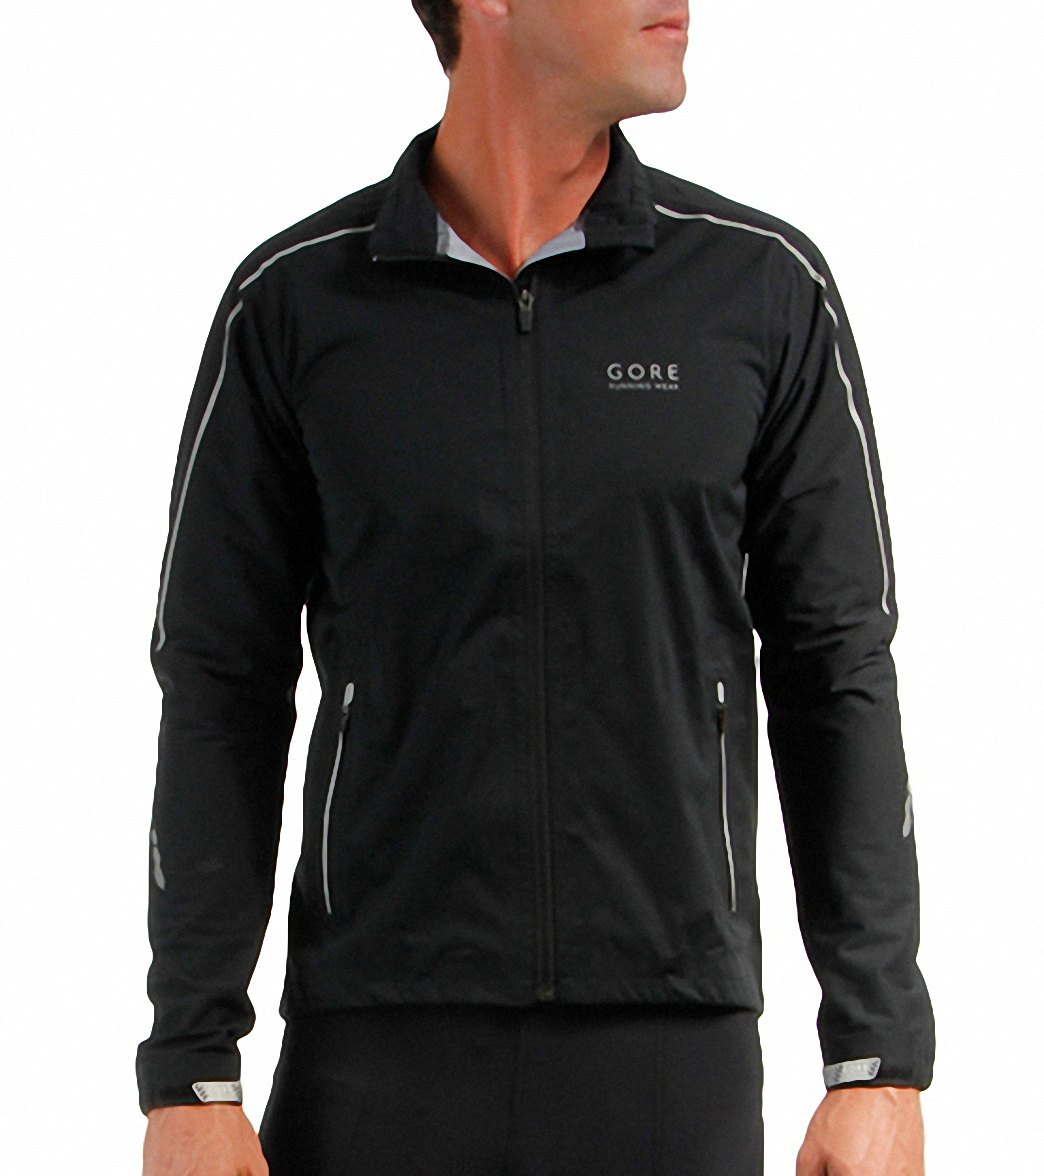 Gore Men's Mythos Gt As Running Jacket - Black Small Polyester - Swimoutlet.com